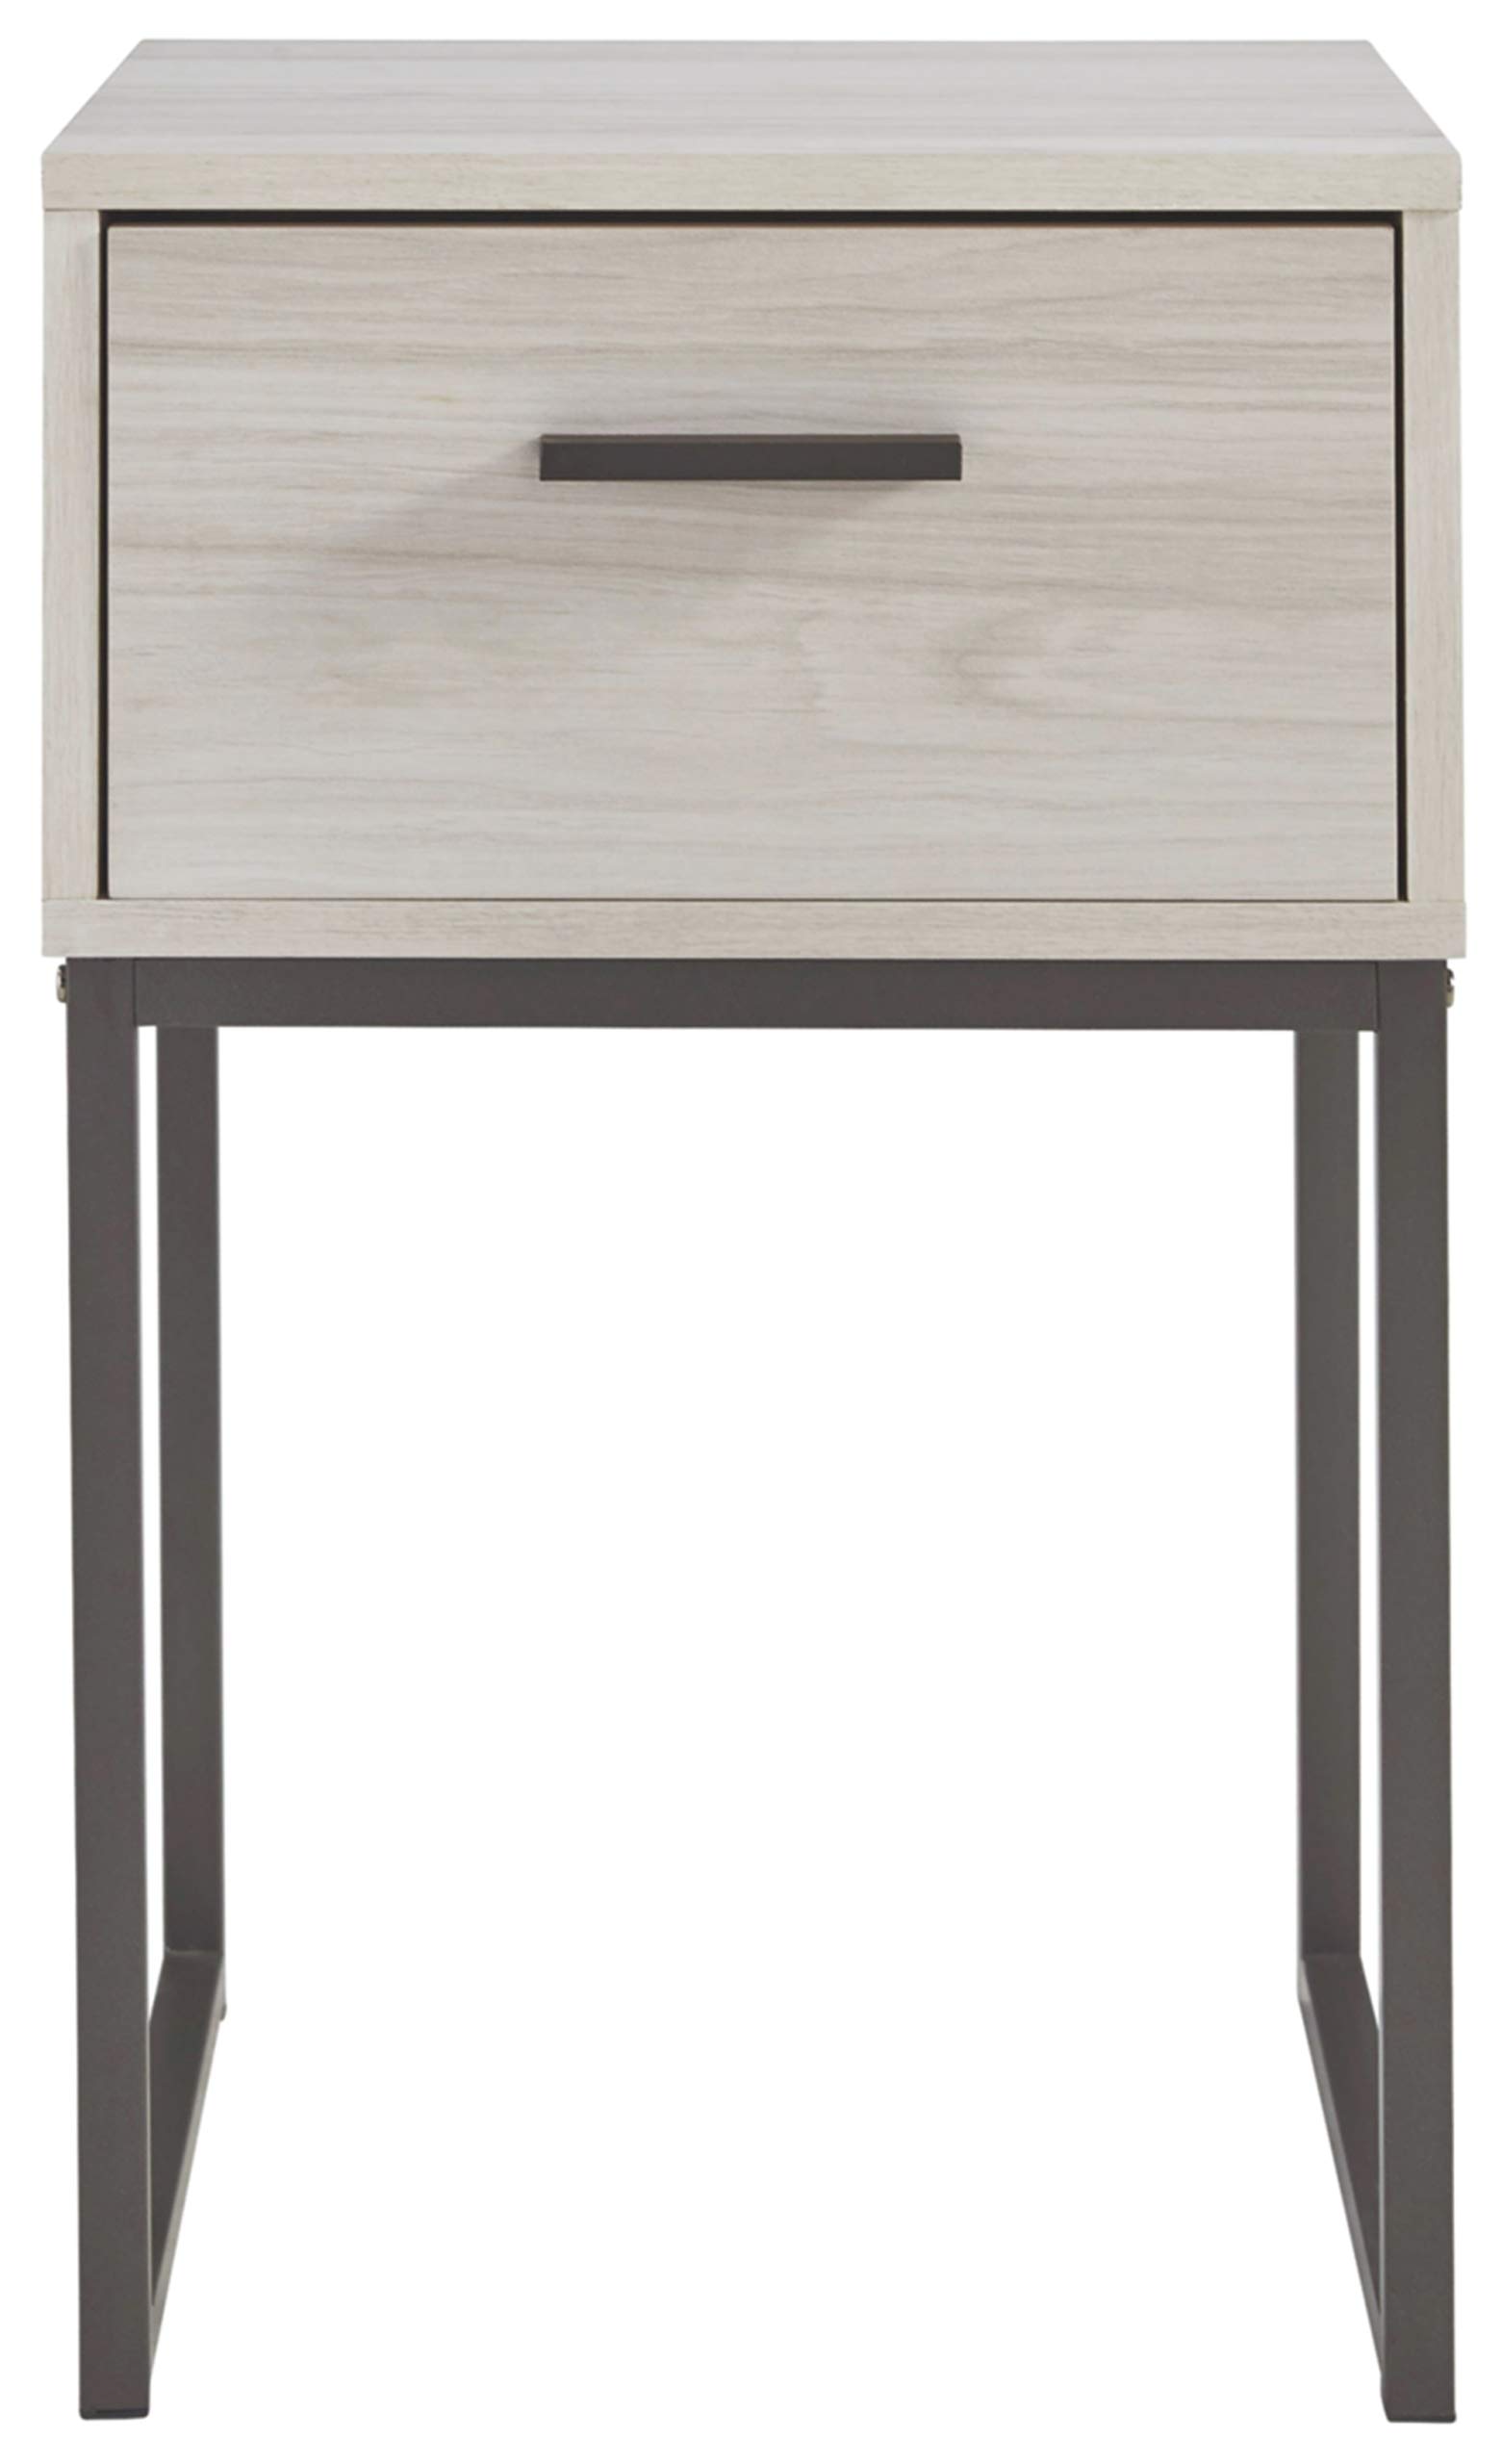 Signature Design by Ashley Socalle Modern Industrial Nightstand, Natural Beige